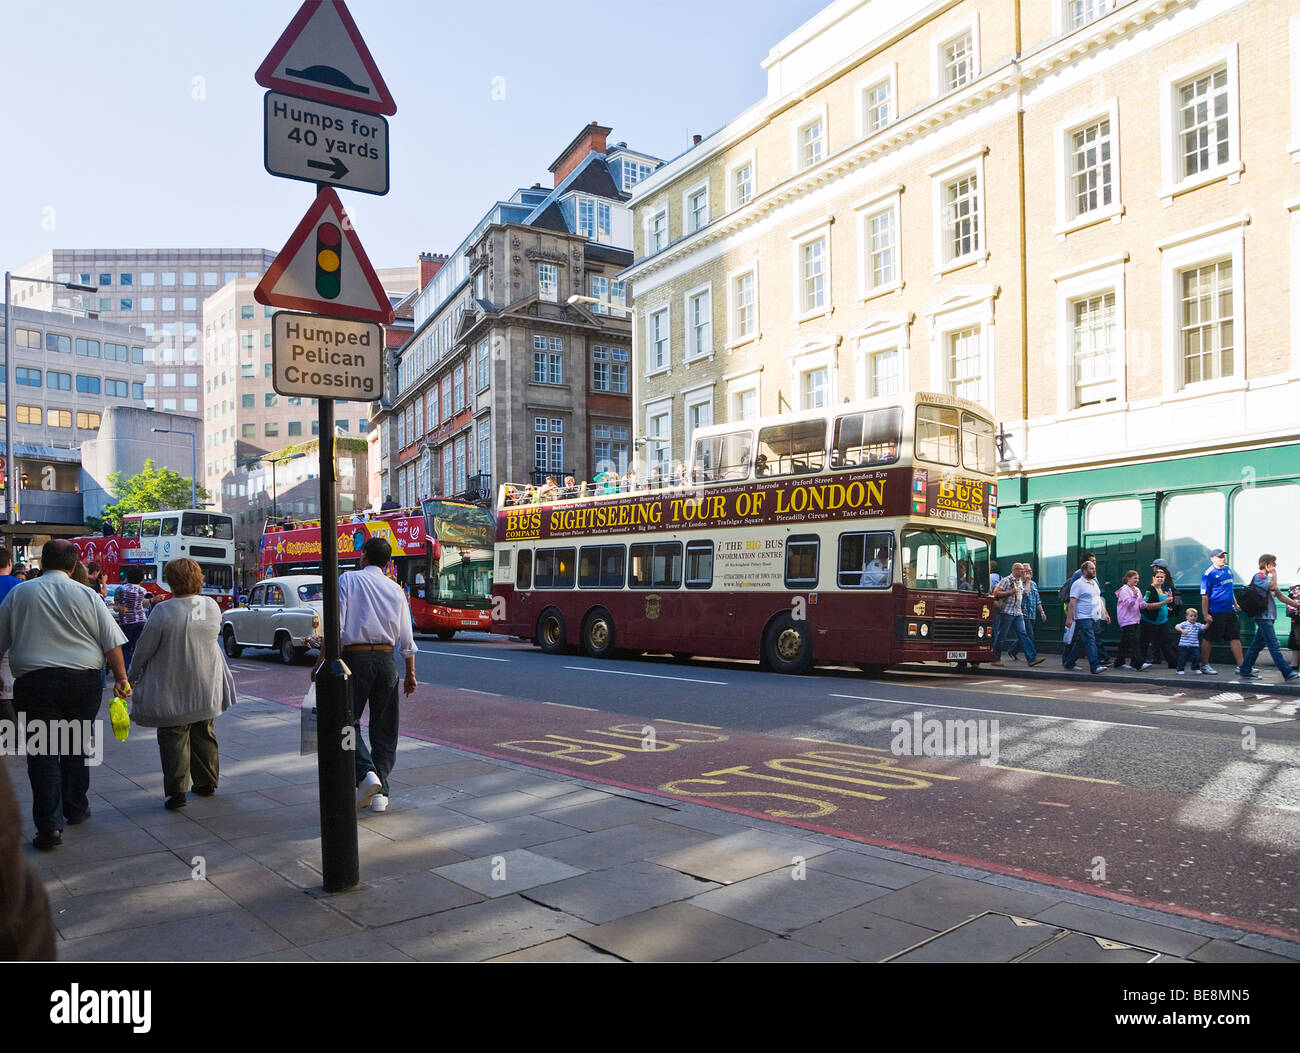 A view of traffic, London sightseeing tour buses and tourists. Tooley Street, London. UK. Stock Photo